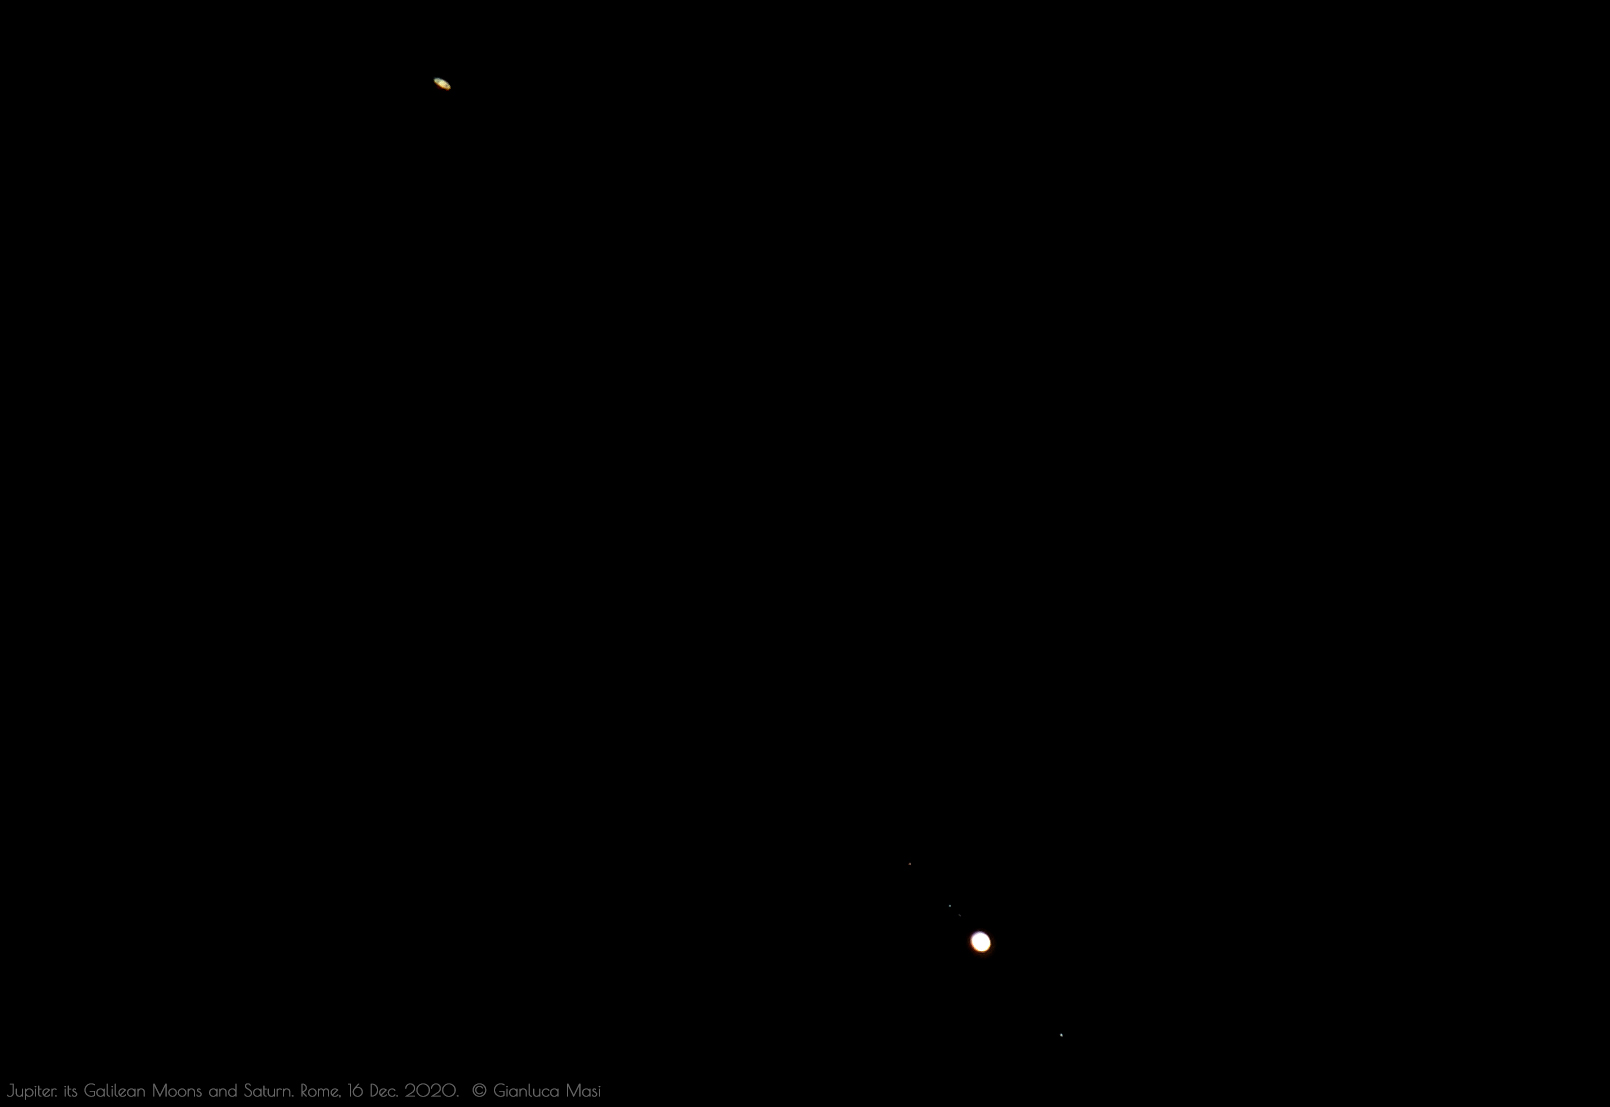 Jupiter shows its principal, four satellites in this image, while pairing with Saturn.